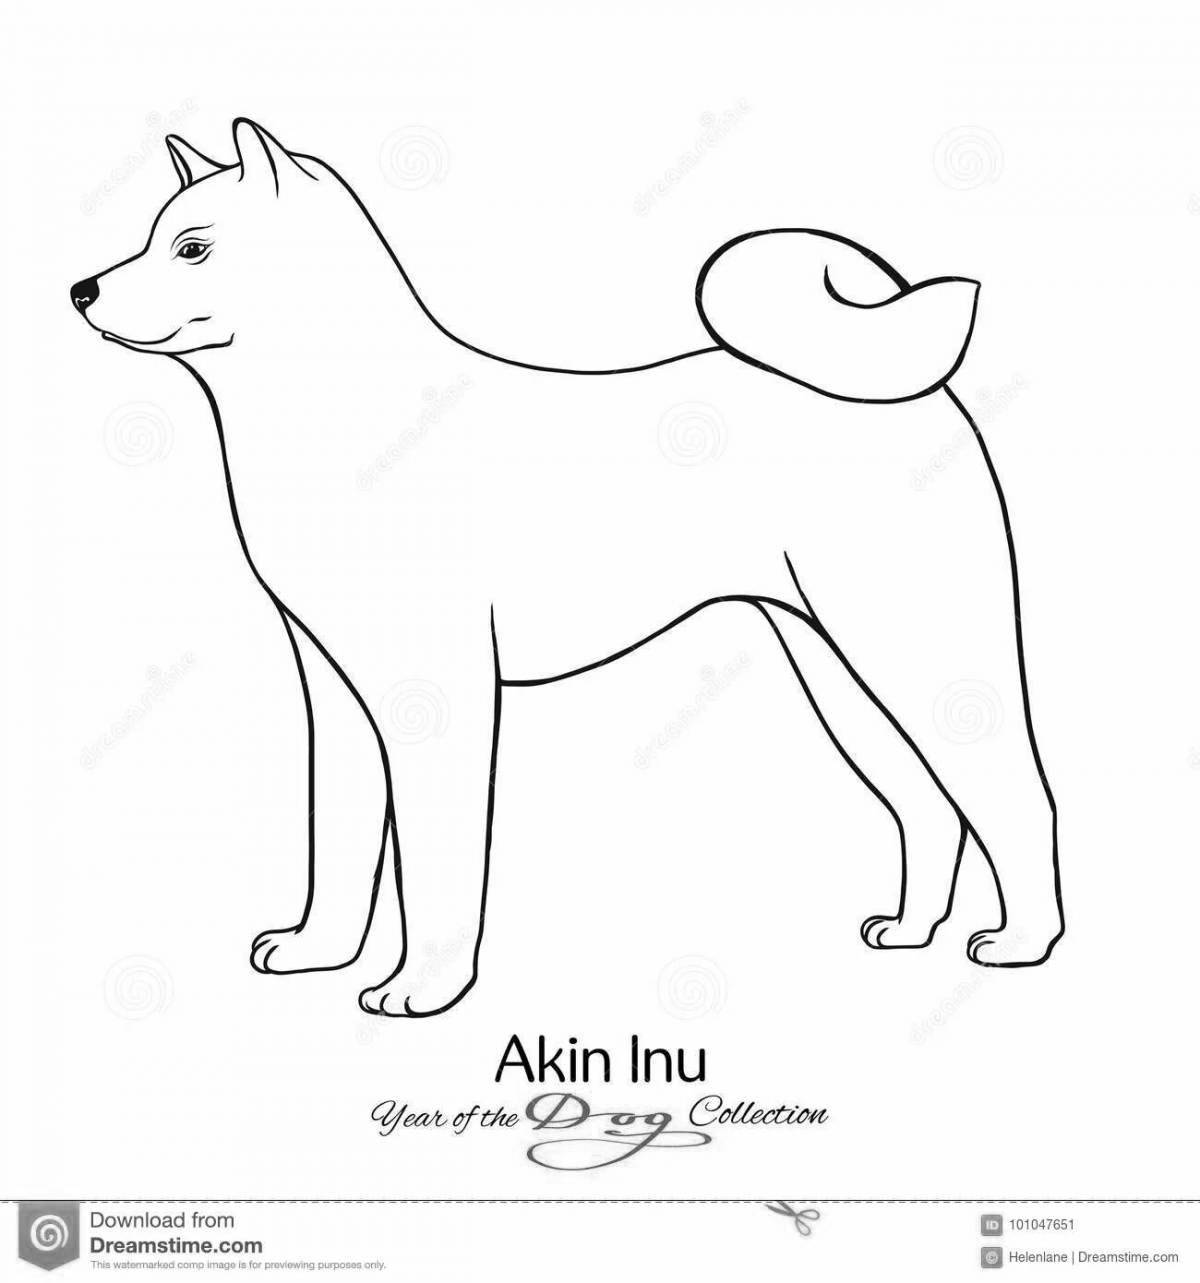 Hachiko live coloring page